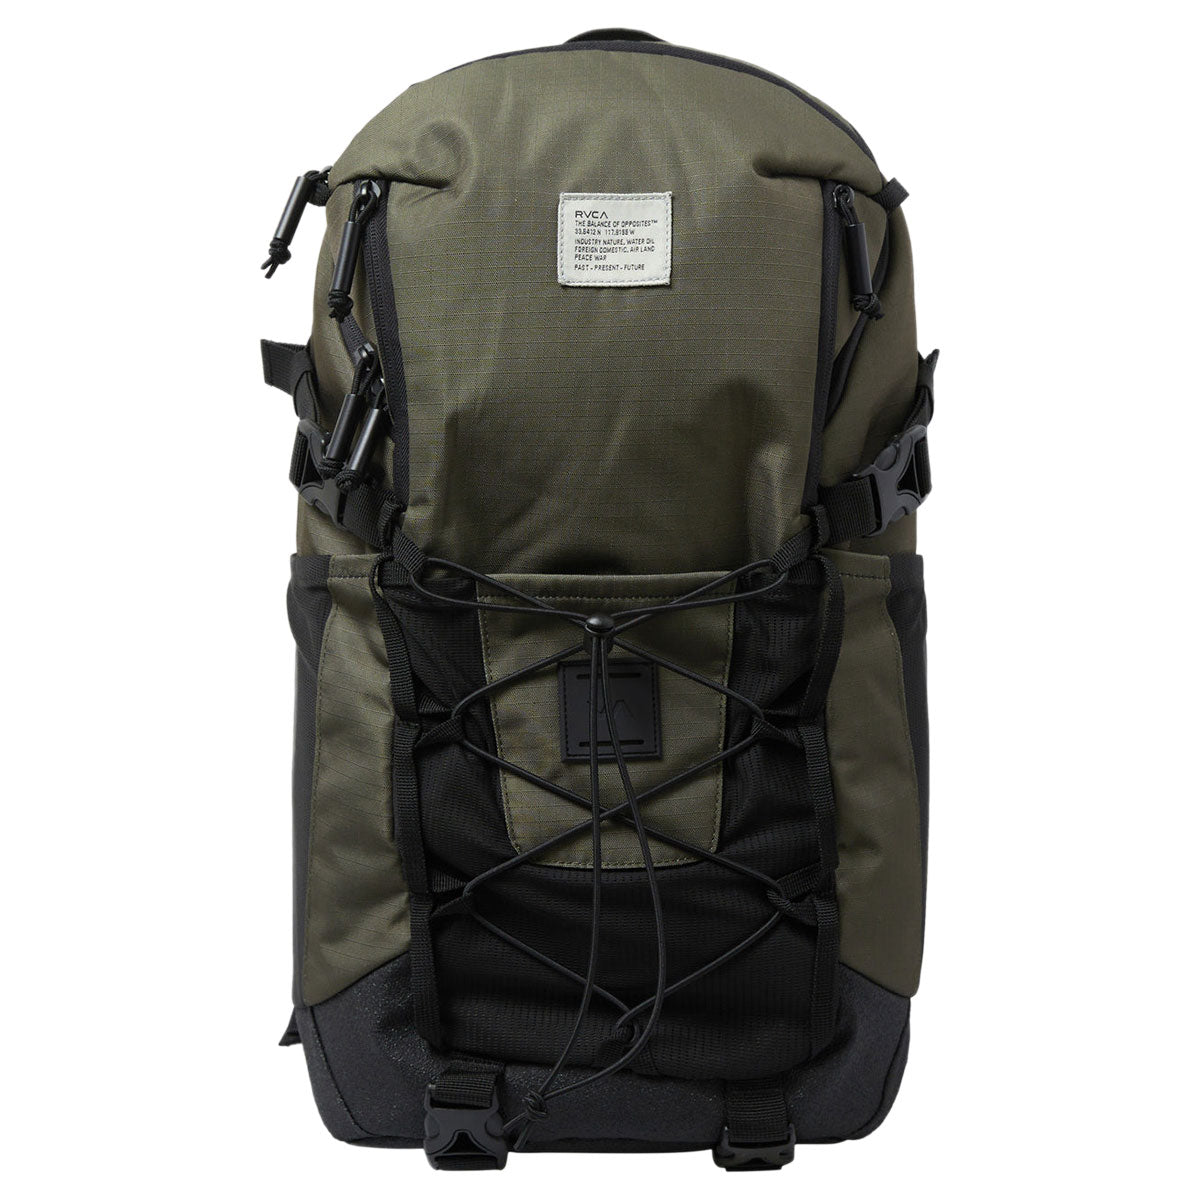 RVCA Rvca Daypack Backpack - Olive image 1